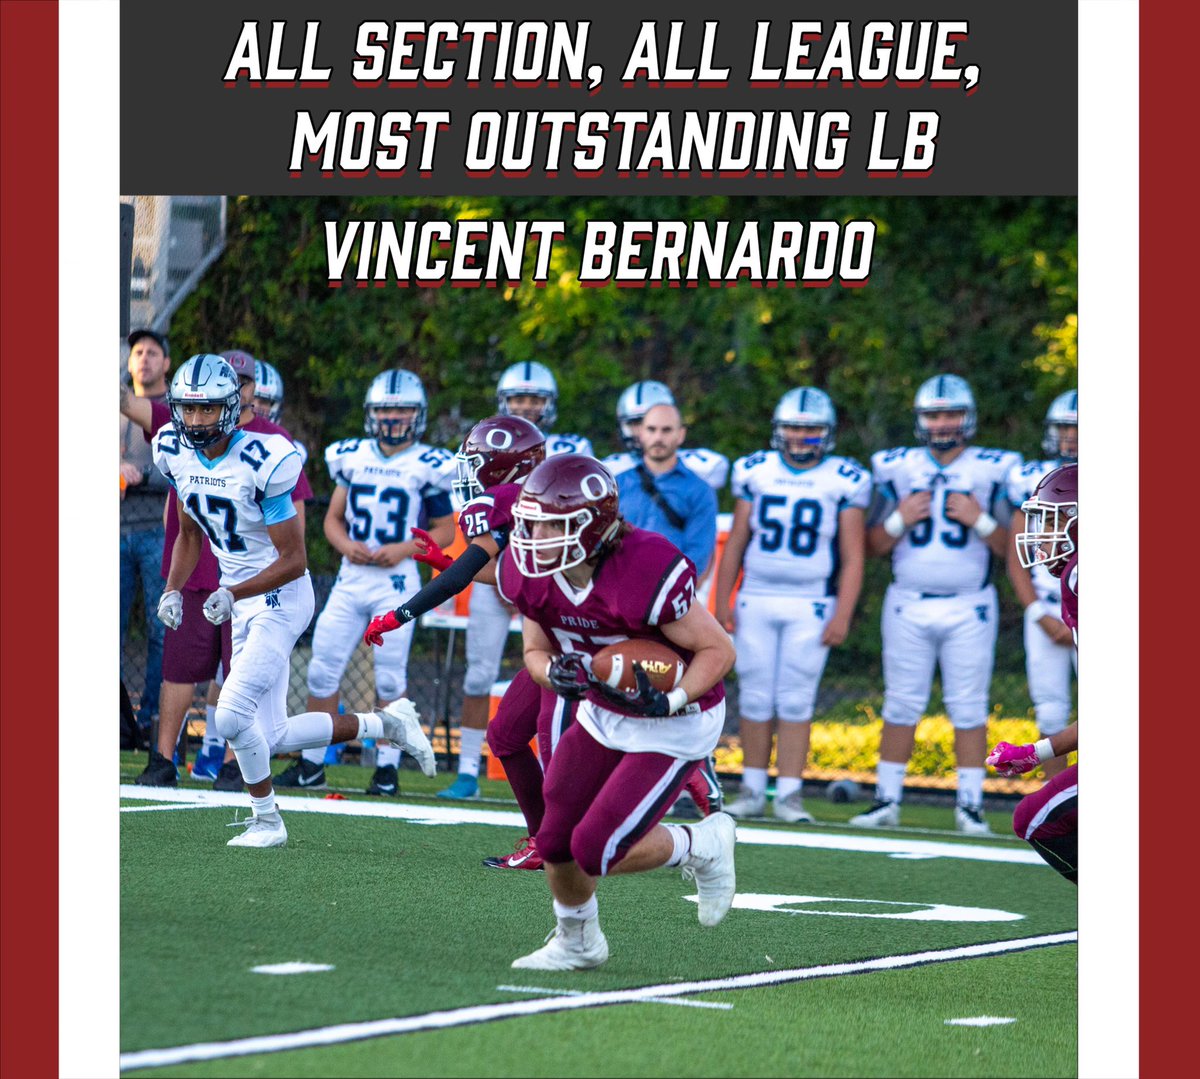 Congratulations to this amazing senior! Four year starter. @Vinny54013799